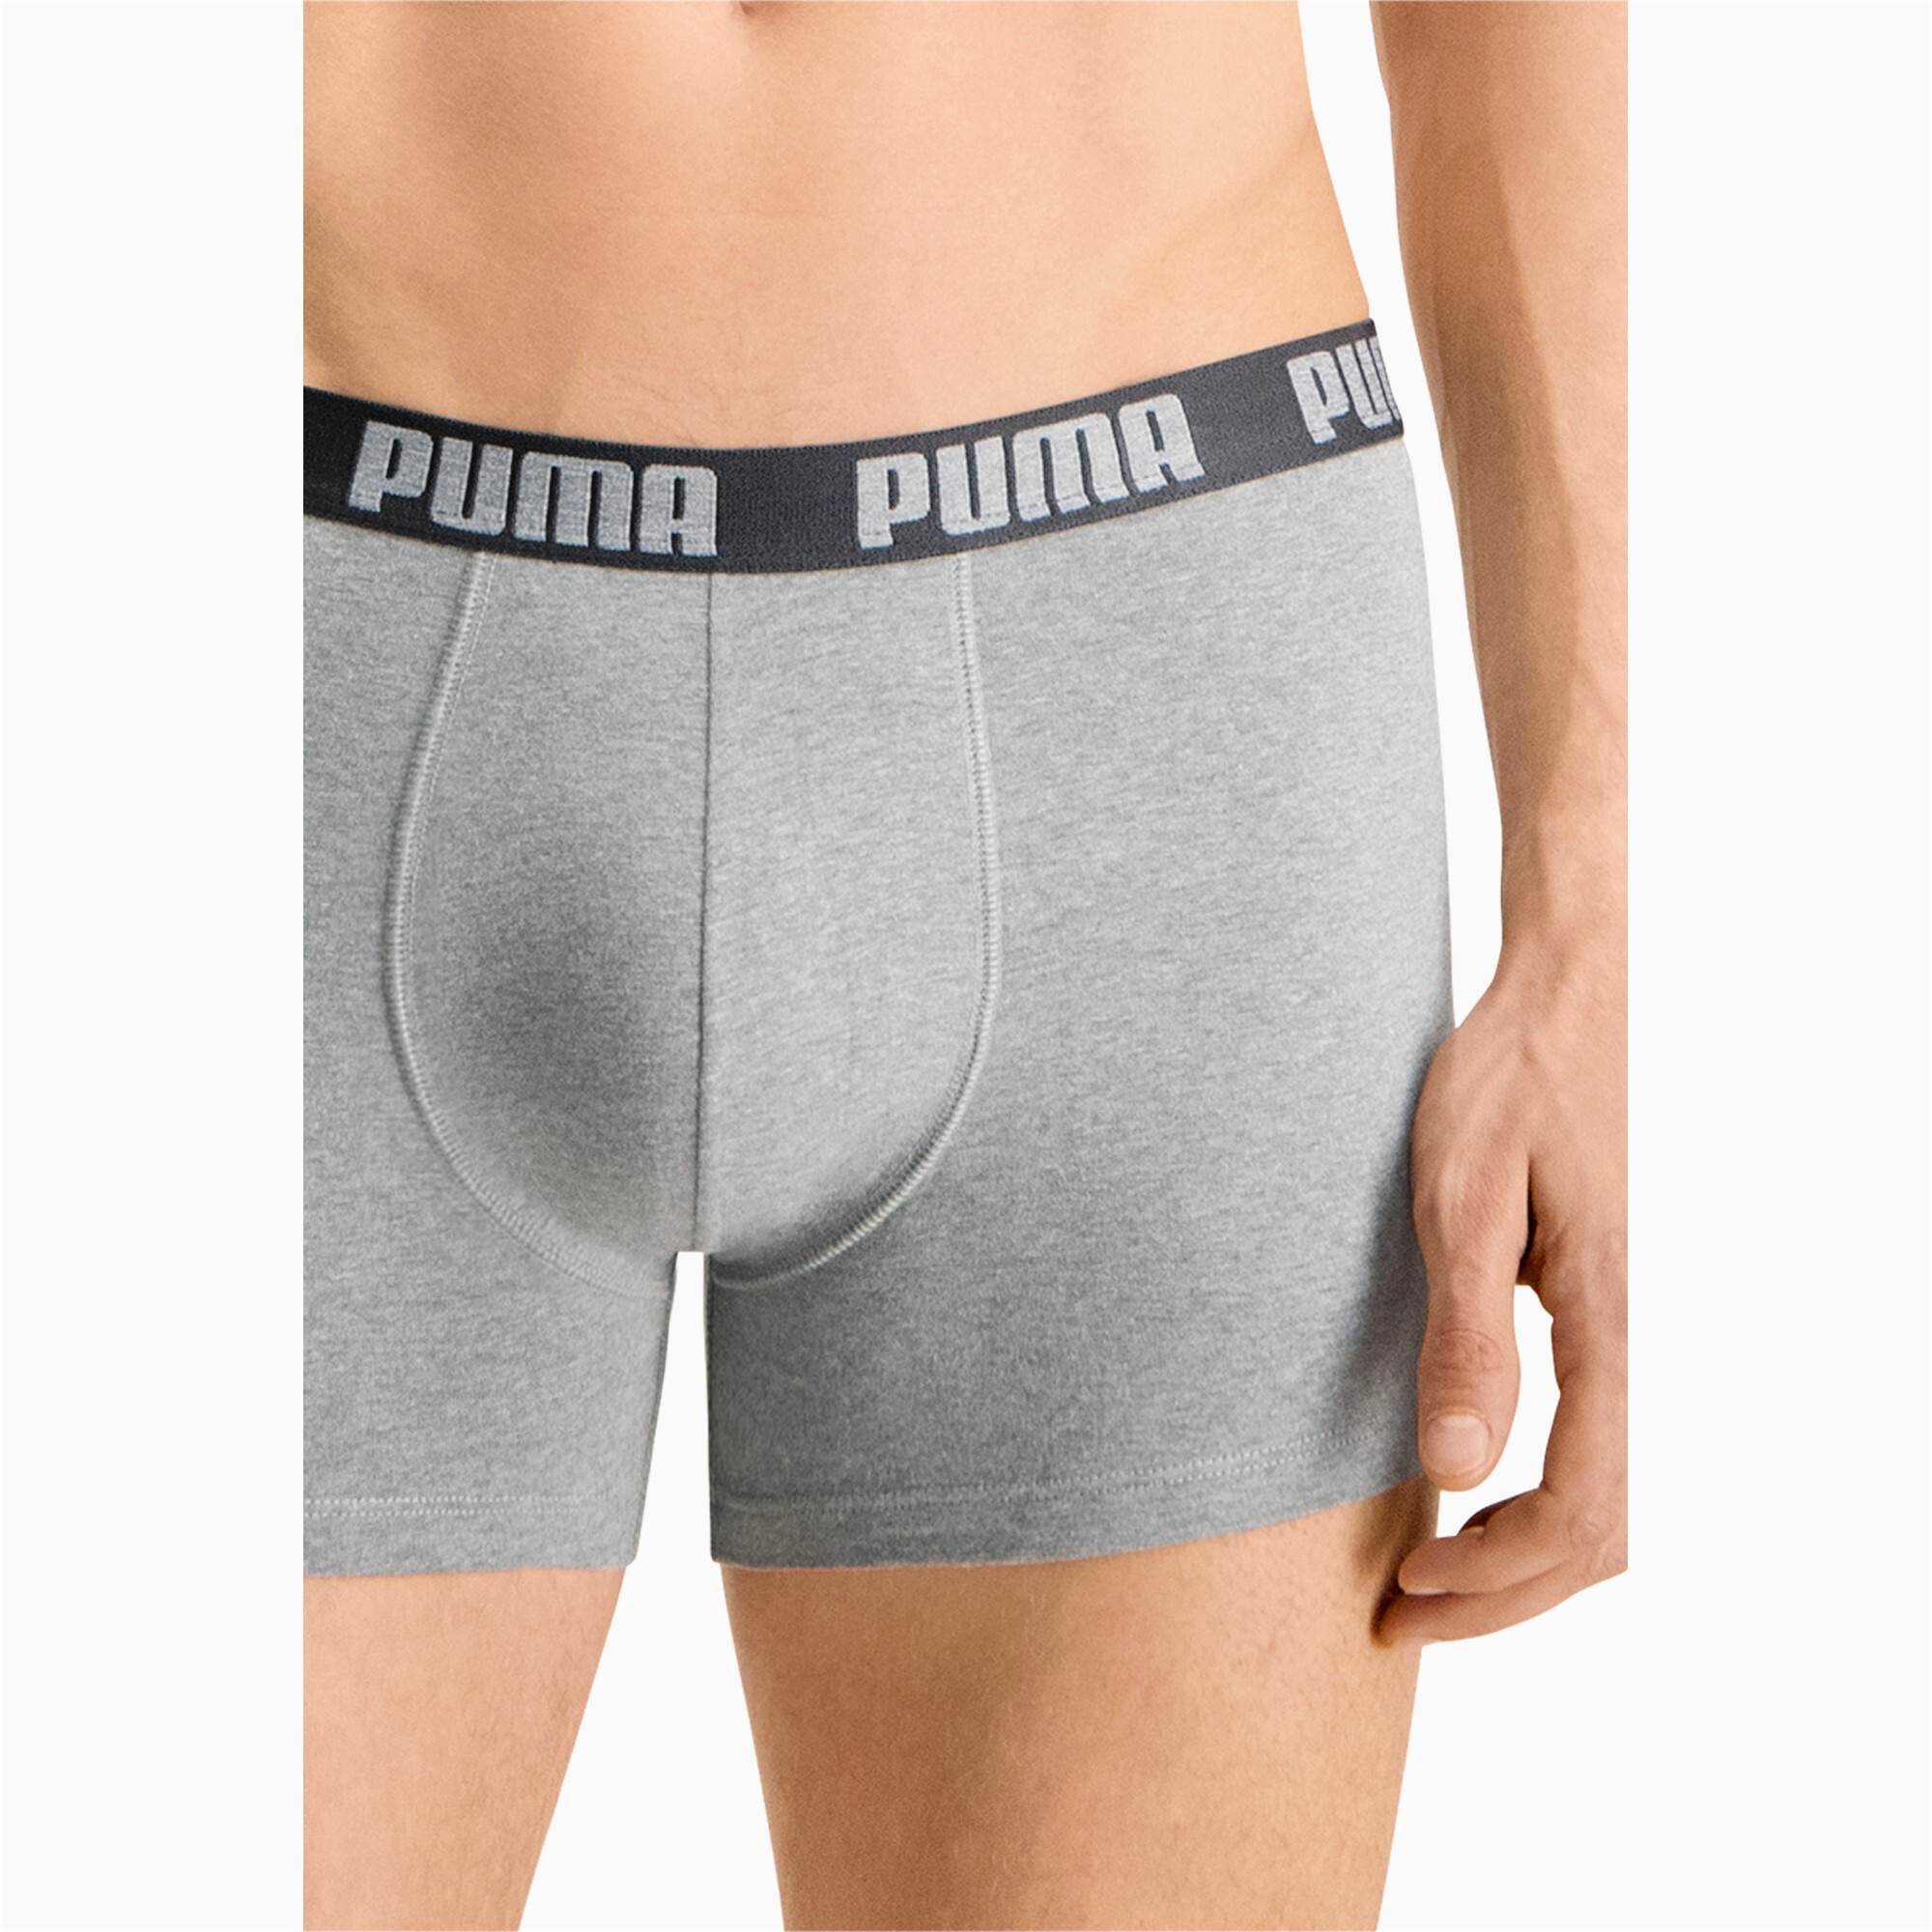 Men's PUMA Everyday Boxers 3 Pack In Black Grey Combo, Size Small